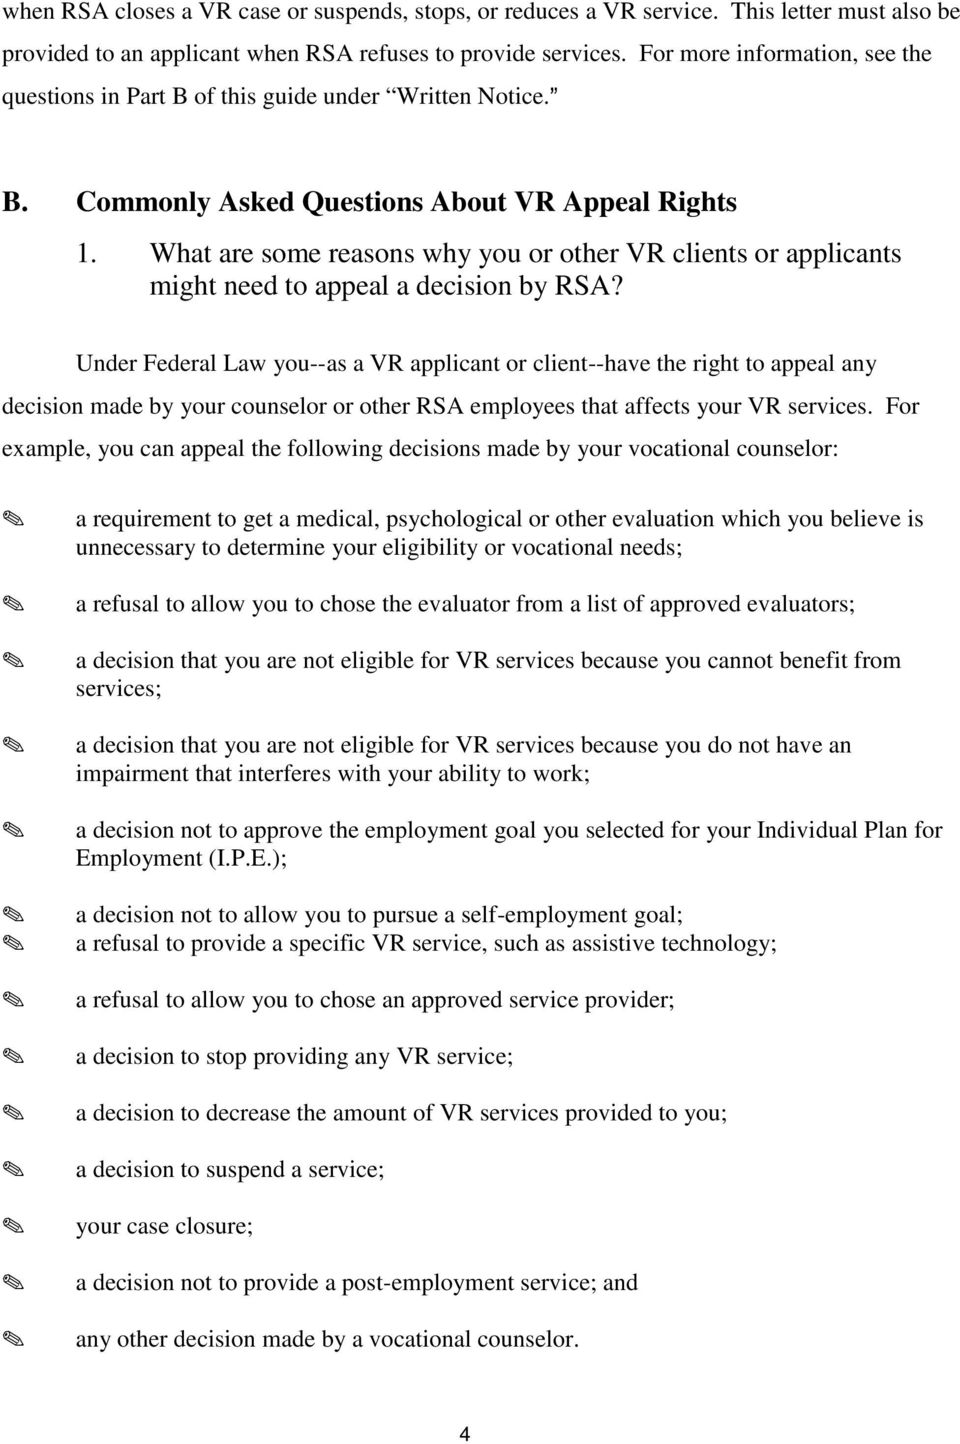 What are some reasons why you or other VR clients or applicants might need to appeal a decision by RSA?